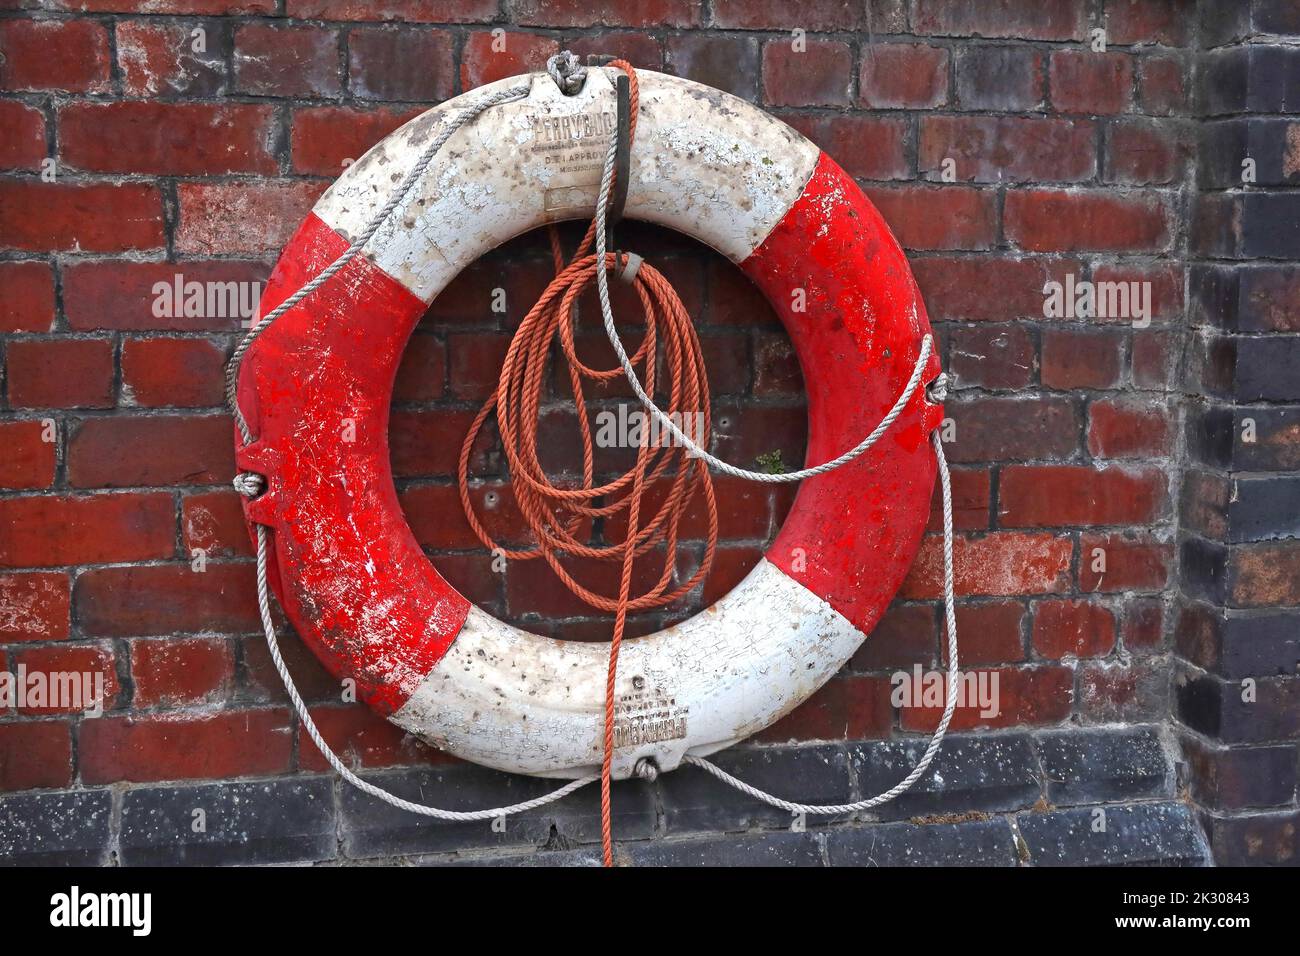 Emergency Red and white, Ferrybuoy life ring, safety belt, affixed to a brick wall beside Bridgewater Canal, with rope Stock Photo